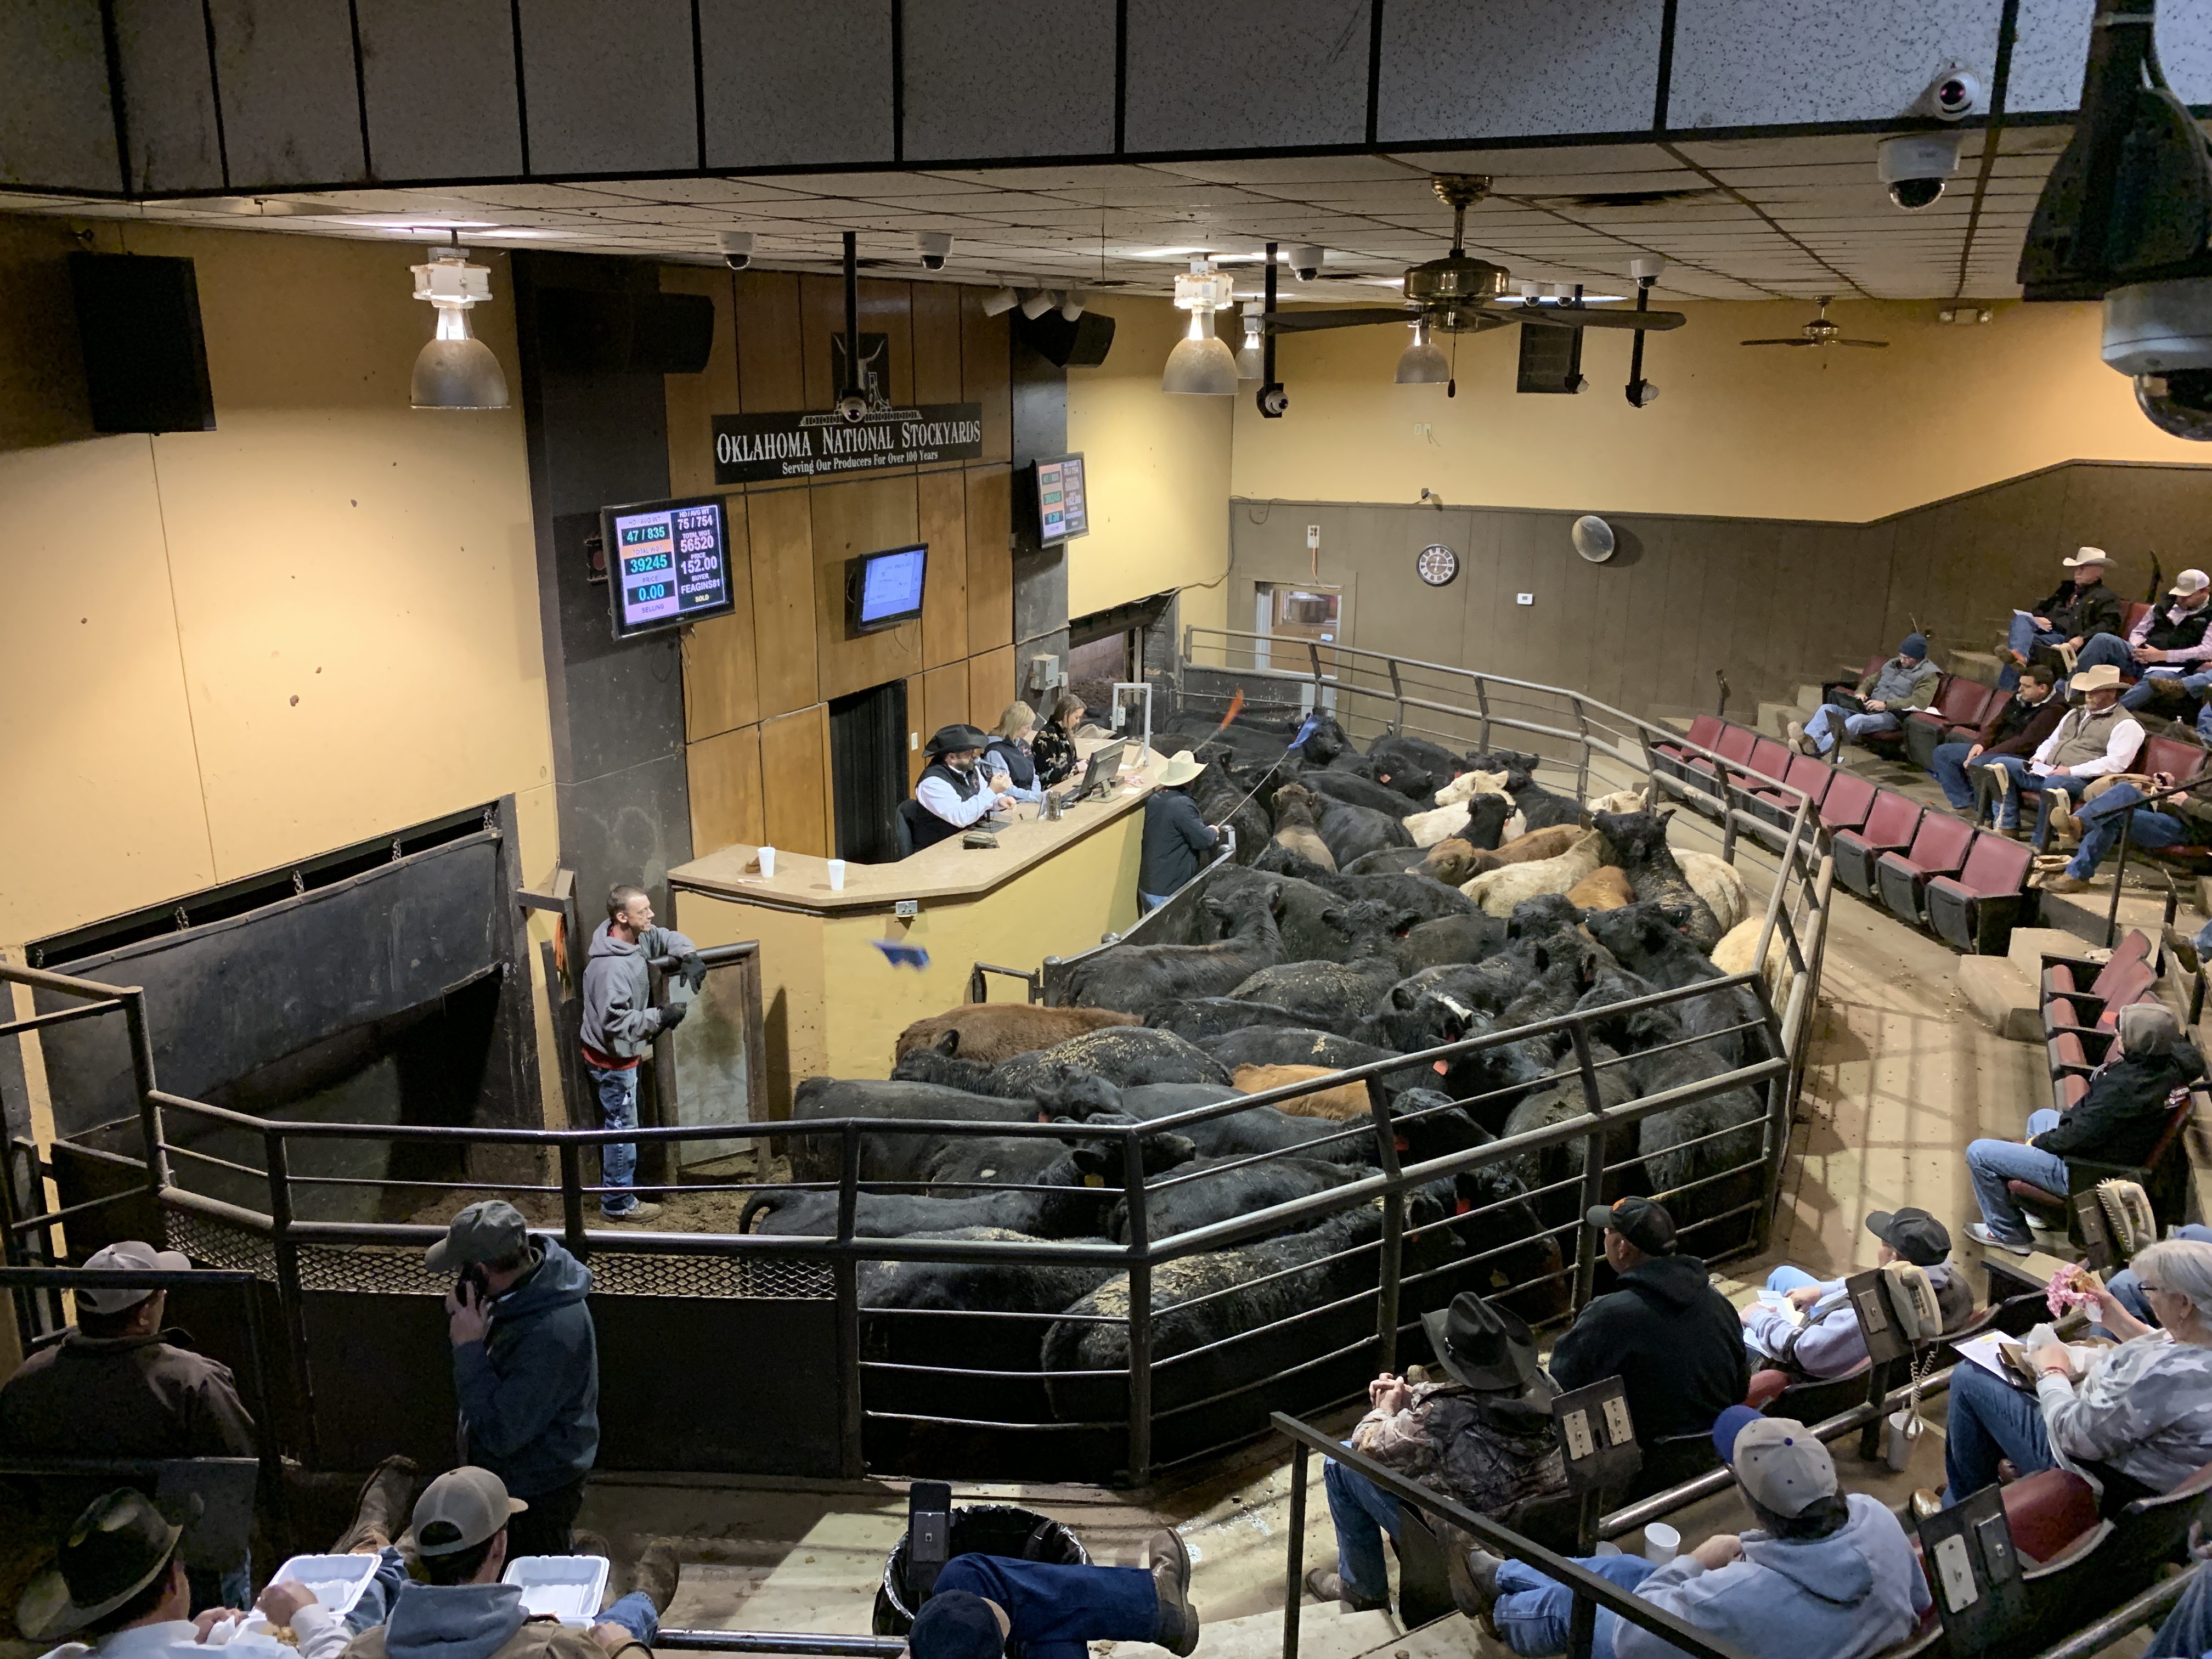 Kelli Payne with Oklahoma National Stockyards Proud to Host AABB Fundraiser and Pleased with 2019 Final Sales